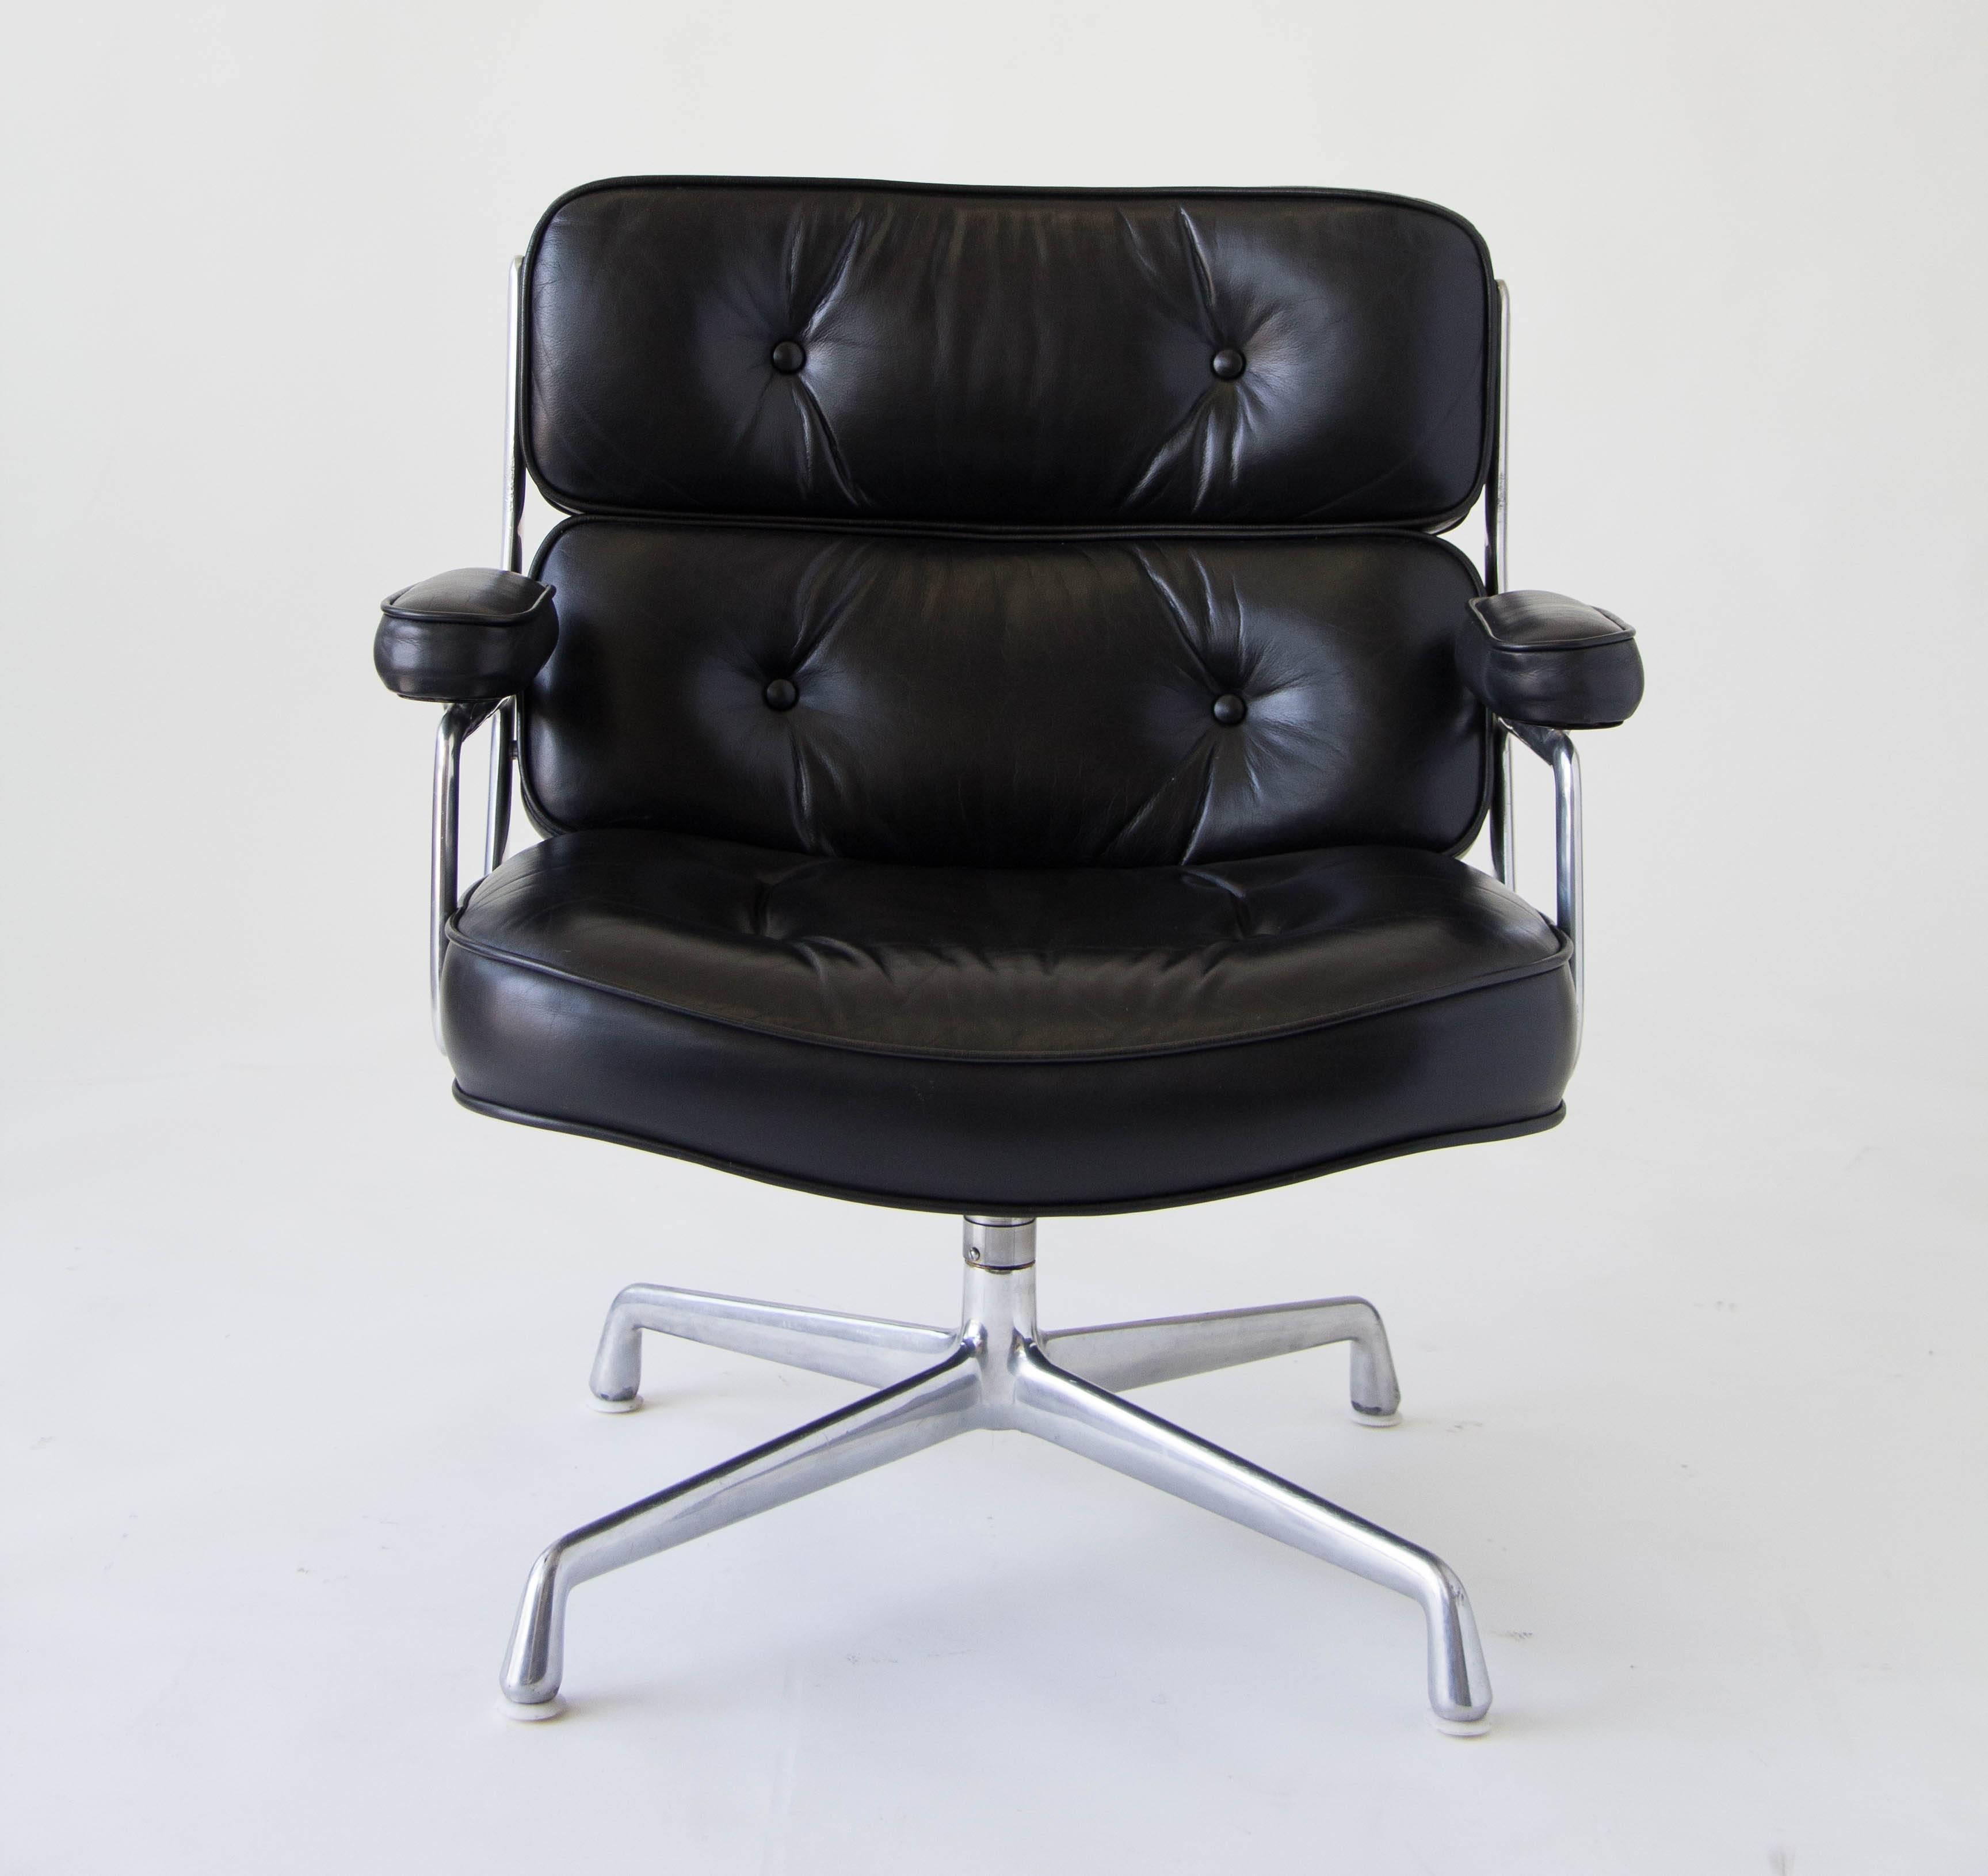 Designed in 1960 by Charles Eames for the Time Life Building in Manhattan, this chair features a polished aluminum frame and sumptuous tufted cushions in the original black leather. The chair sits on four plastic glides. This is the slightly wider